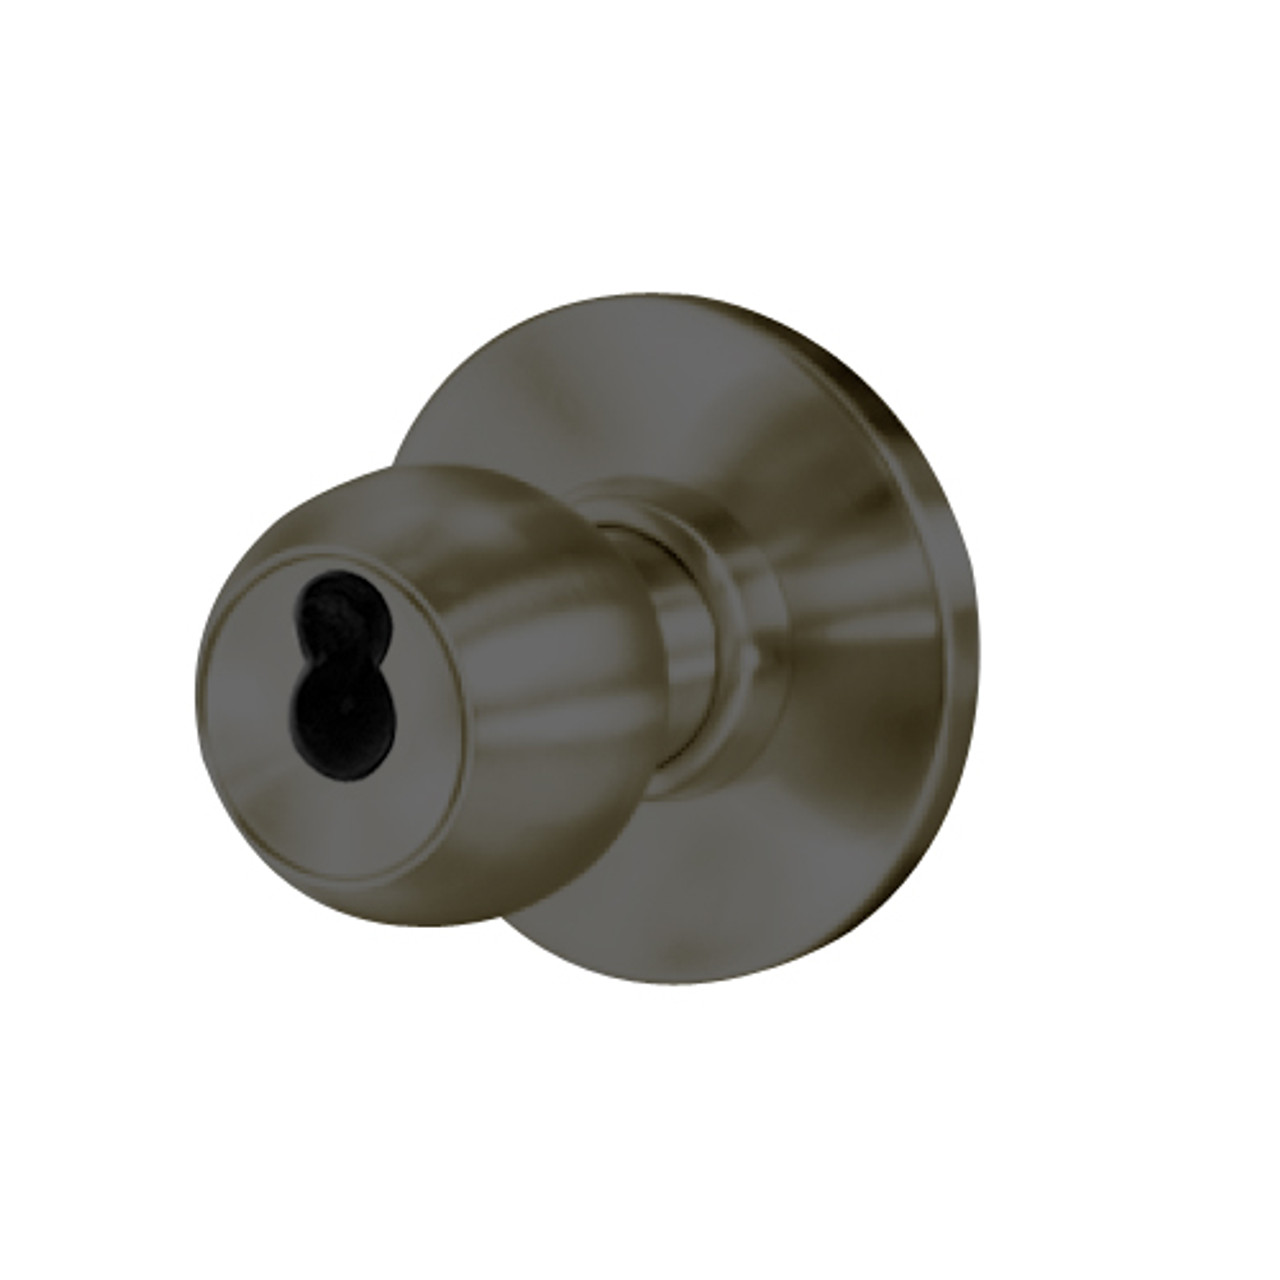 8K57YR4ASTK613 Best 8K Series Exit Heavy Duty Cylindrical Knob Locks with Round Style in Oil Rubbed Bronze